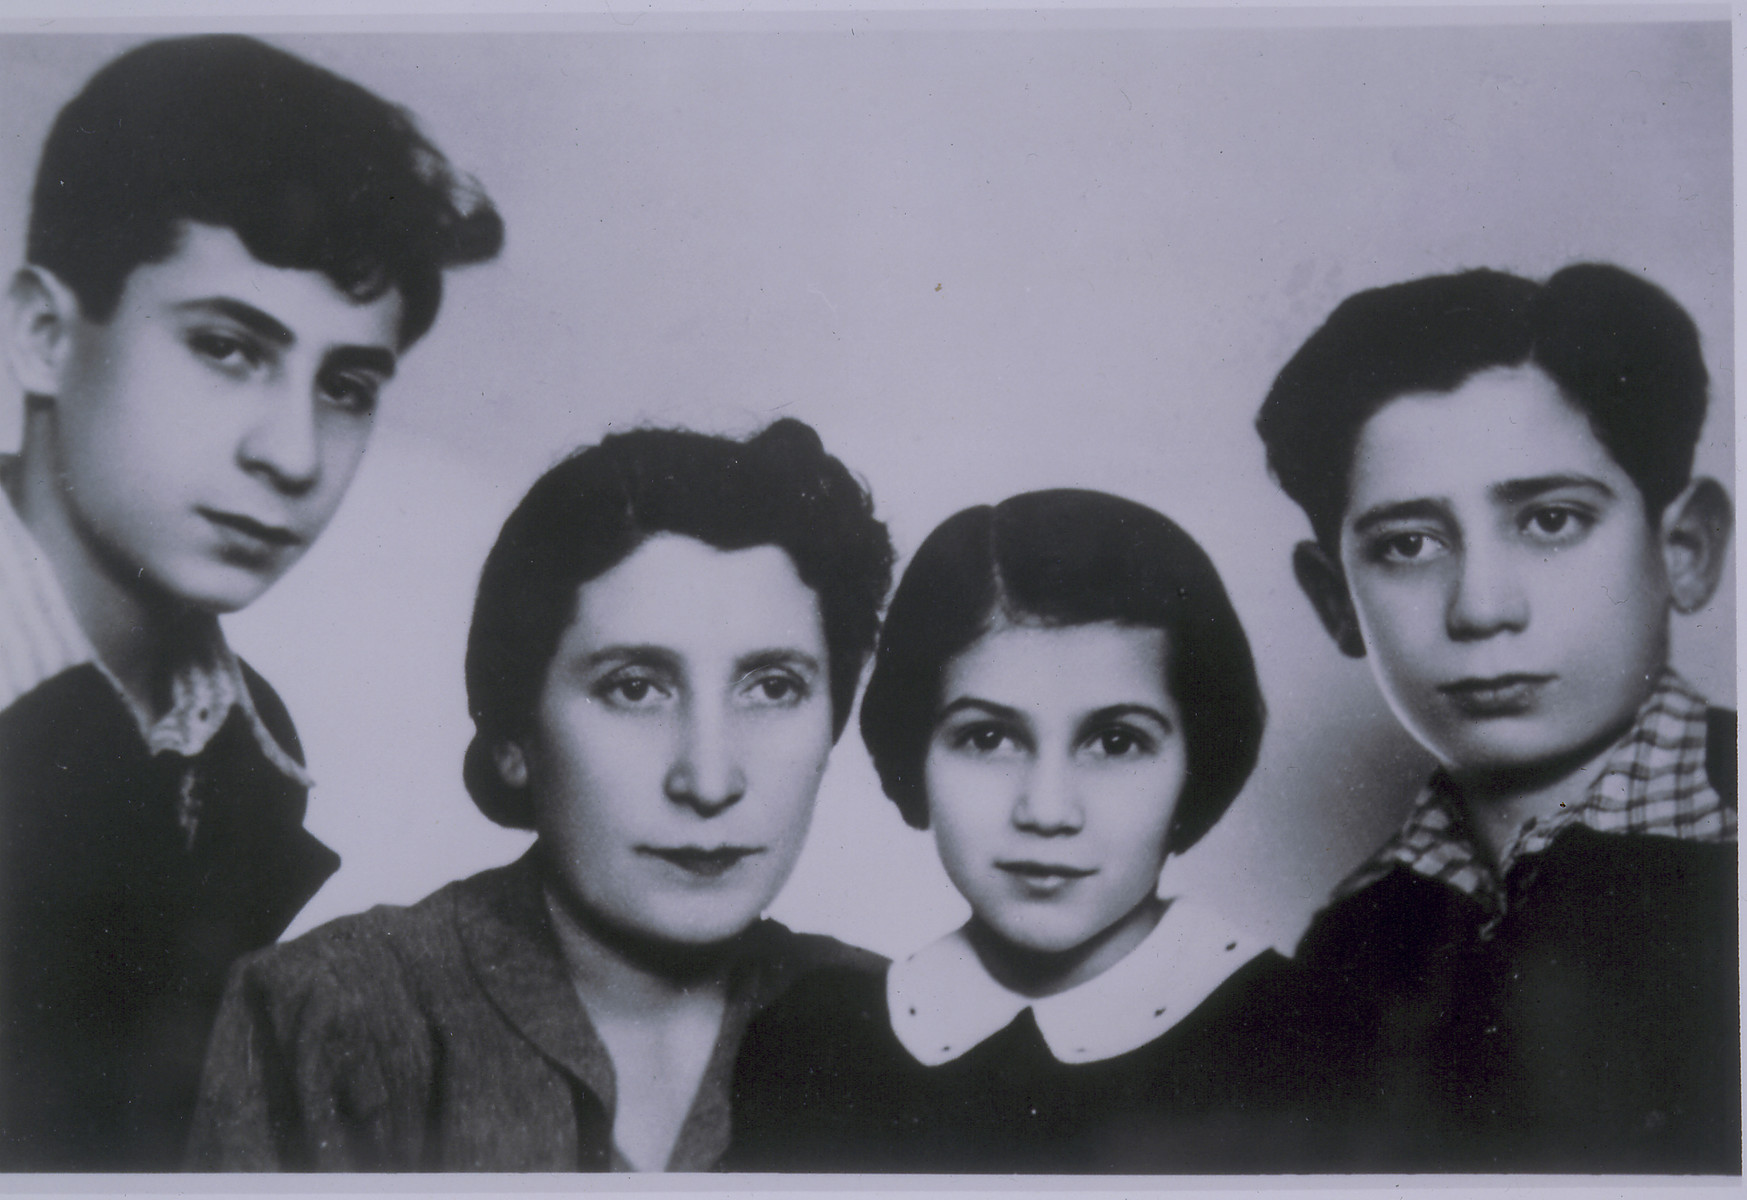 Photograph of Hela Berkowicz and her children Henryk, Noemi and Bernard taken in Warsaw and sent to Hela's husband Lejba Berkowicz in Vilna.  All four were later killed in Treblinka.